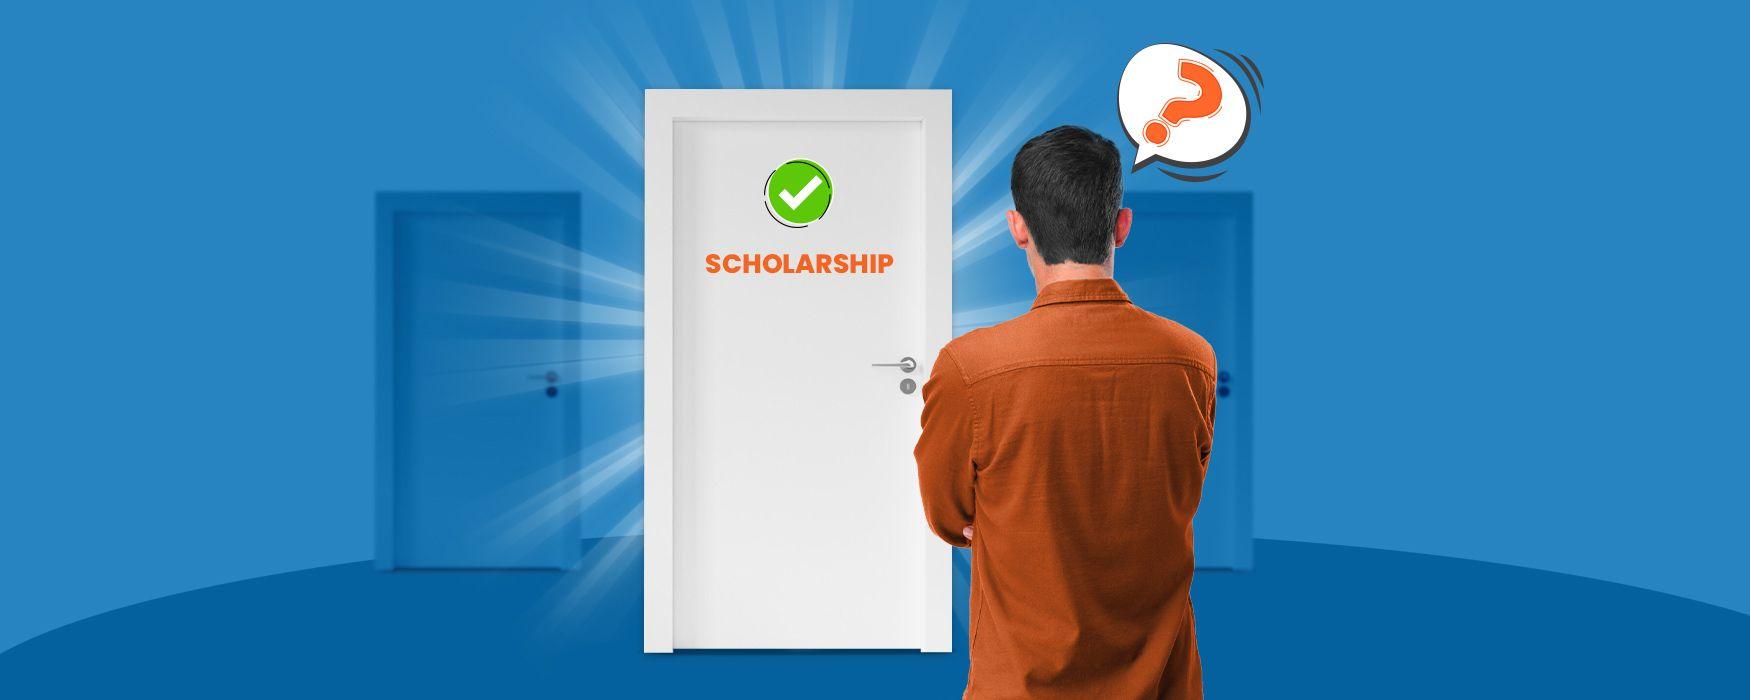 How-To-Choose-Your-Right-Fit-Scholarship.jpg